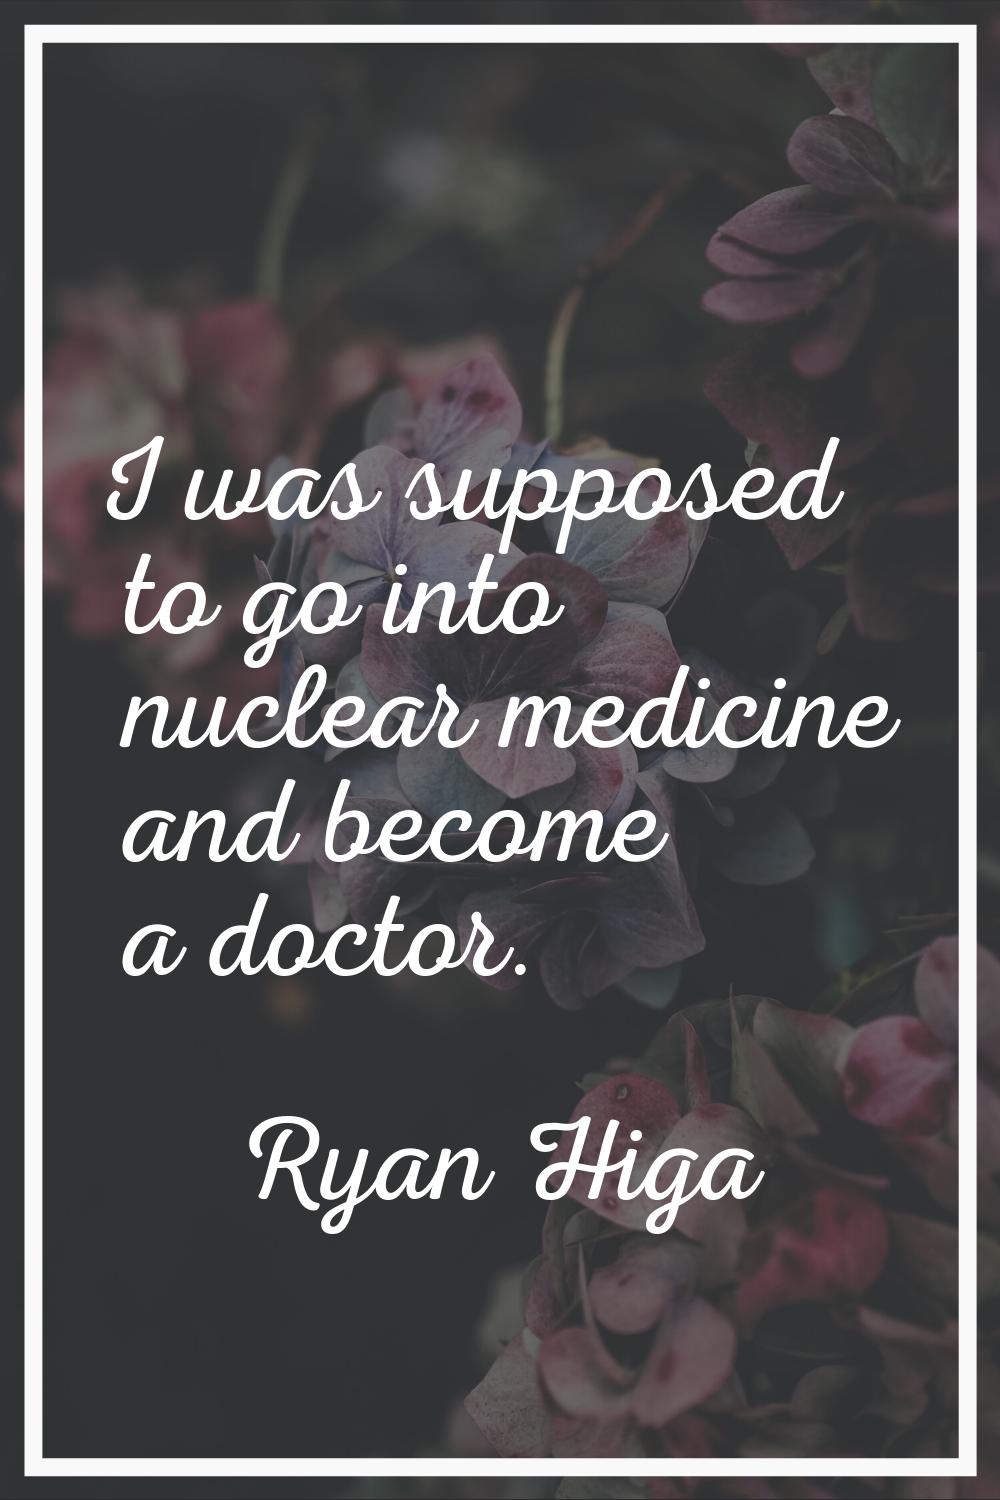 I was supposed to go into nuclear medicine and become a doctor.